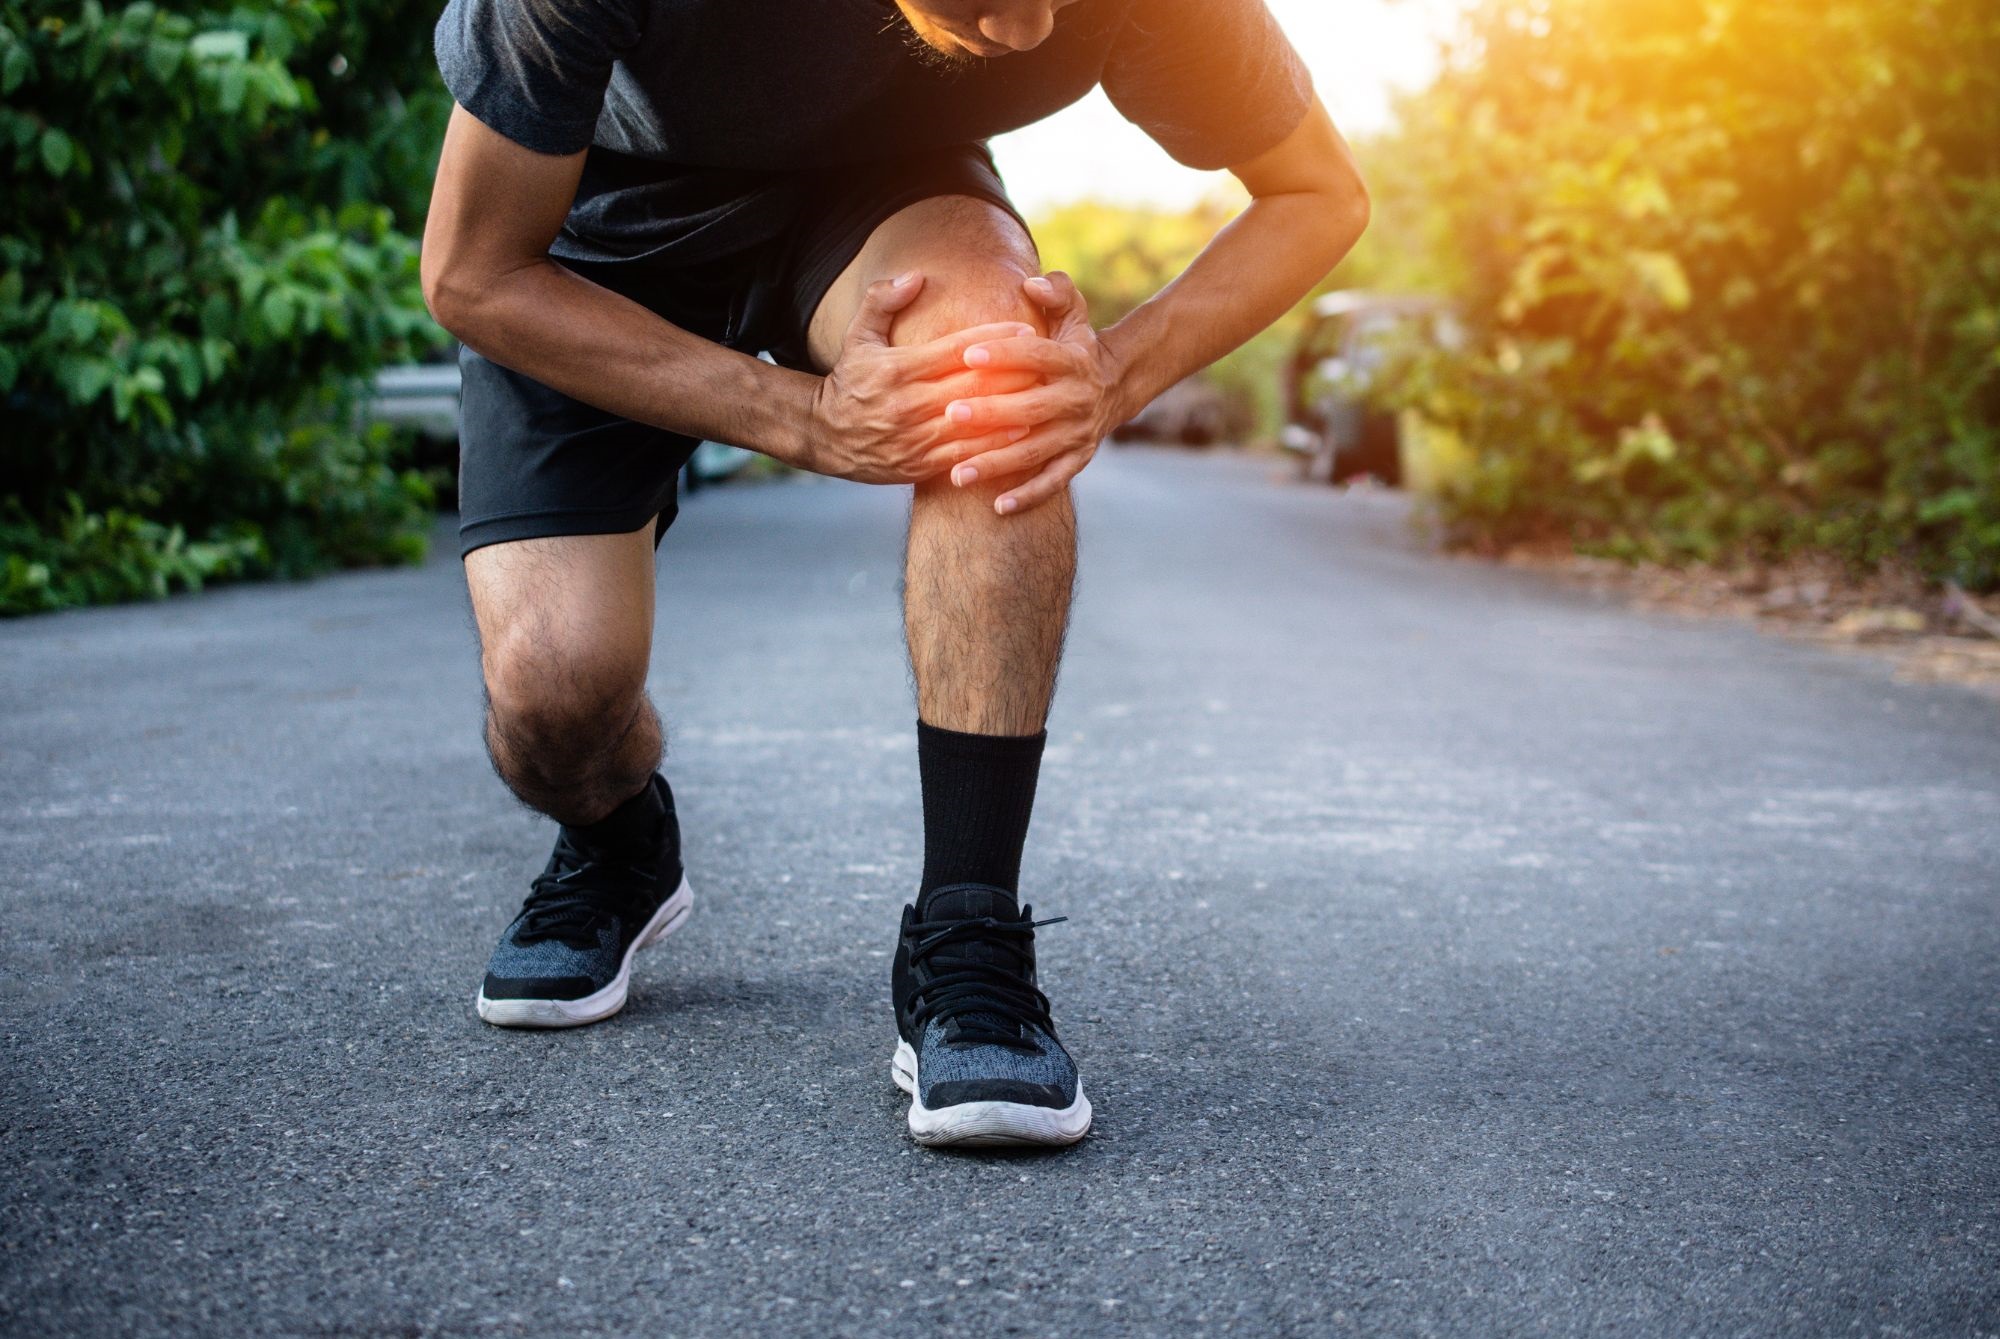 A man suffering from knee pain after running.